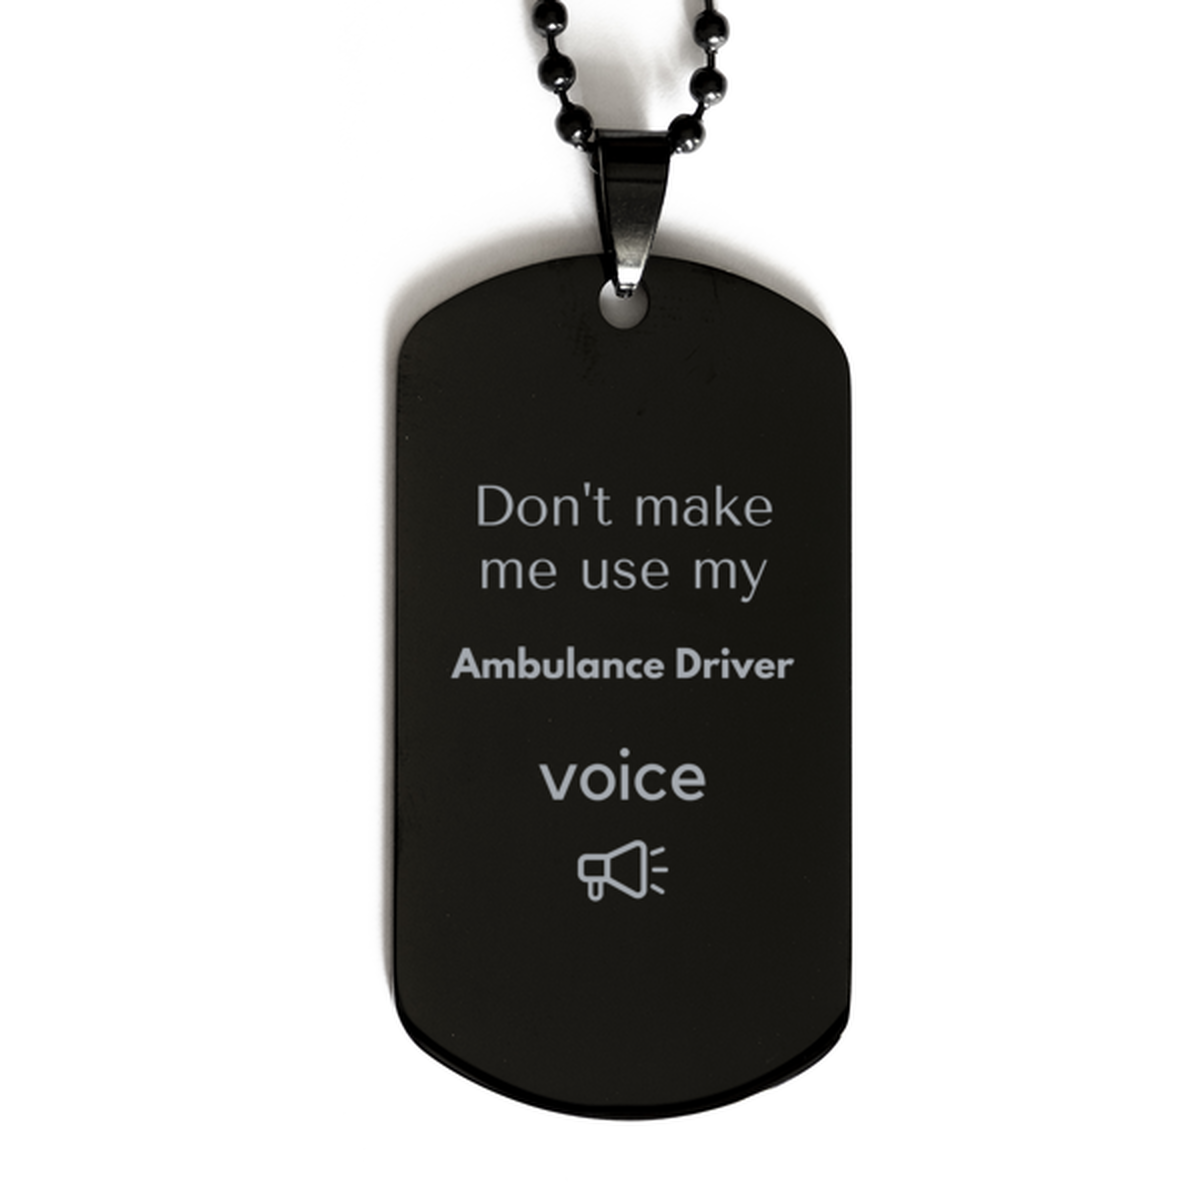 Don't make me use my Ambulance Driver voice, Sarcasm Ambulance Driver Gifts, Christmas Ambulance Driver Black Dog Tag Birthday Unique Gifts For Ambulance Driver Coworkers, Men, Women, Colleague, Friends